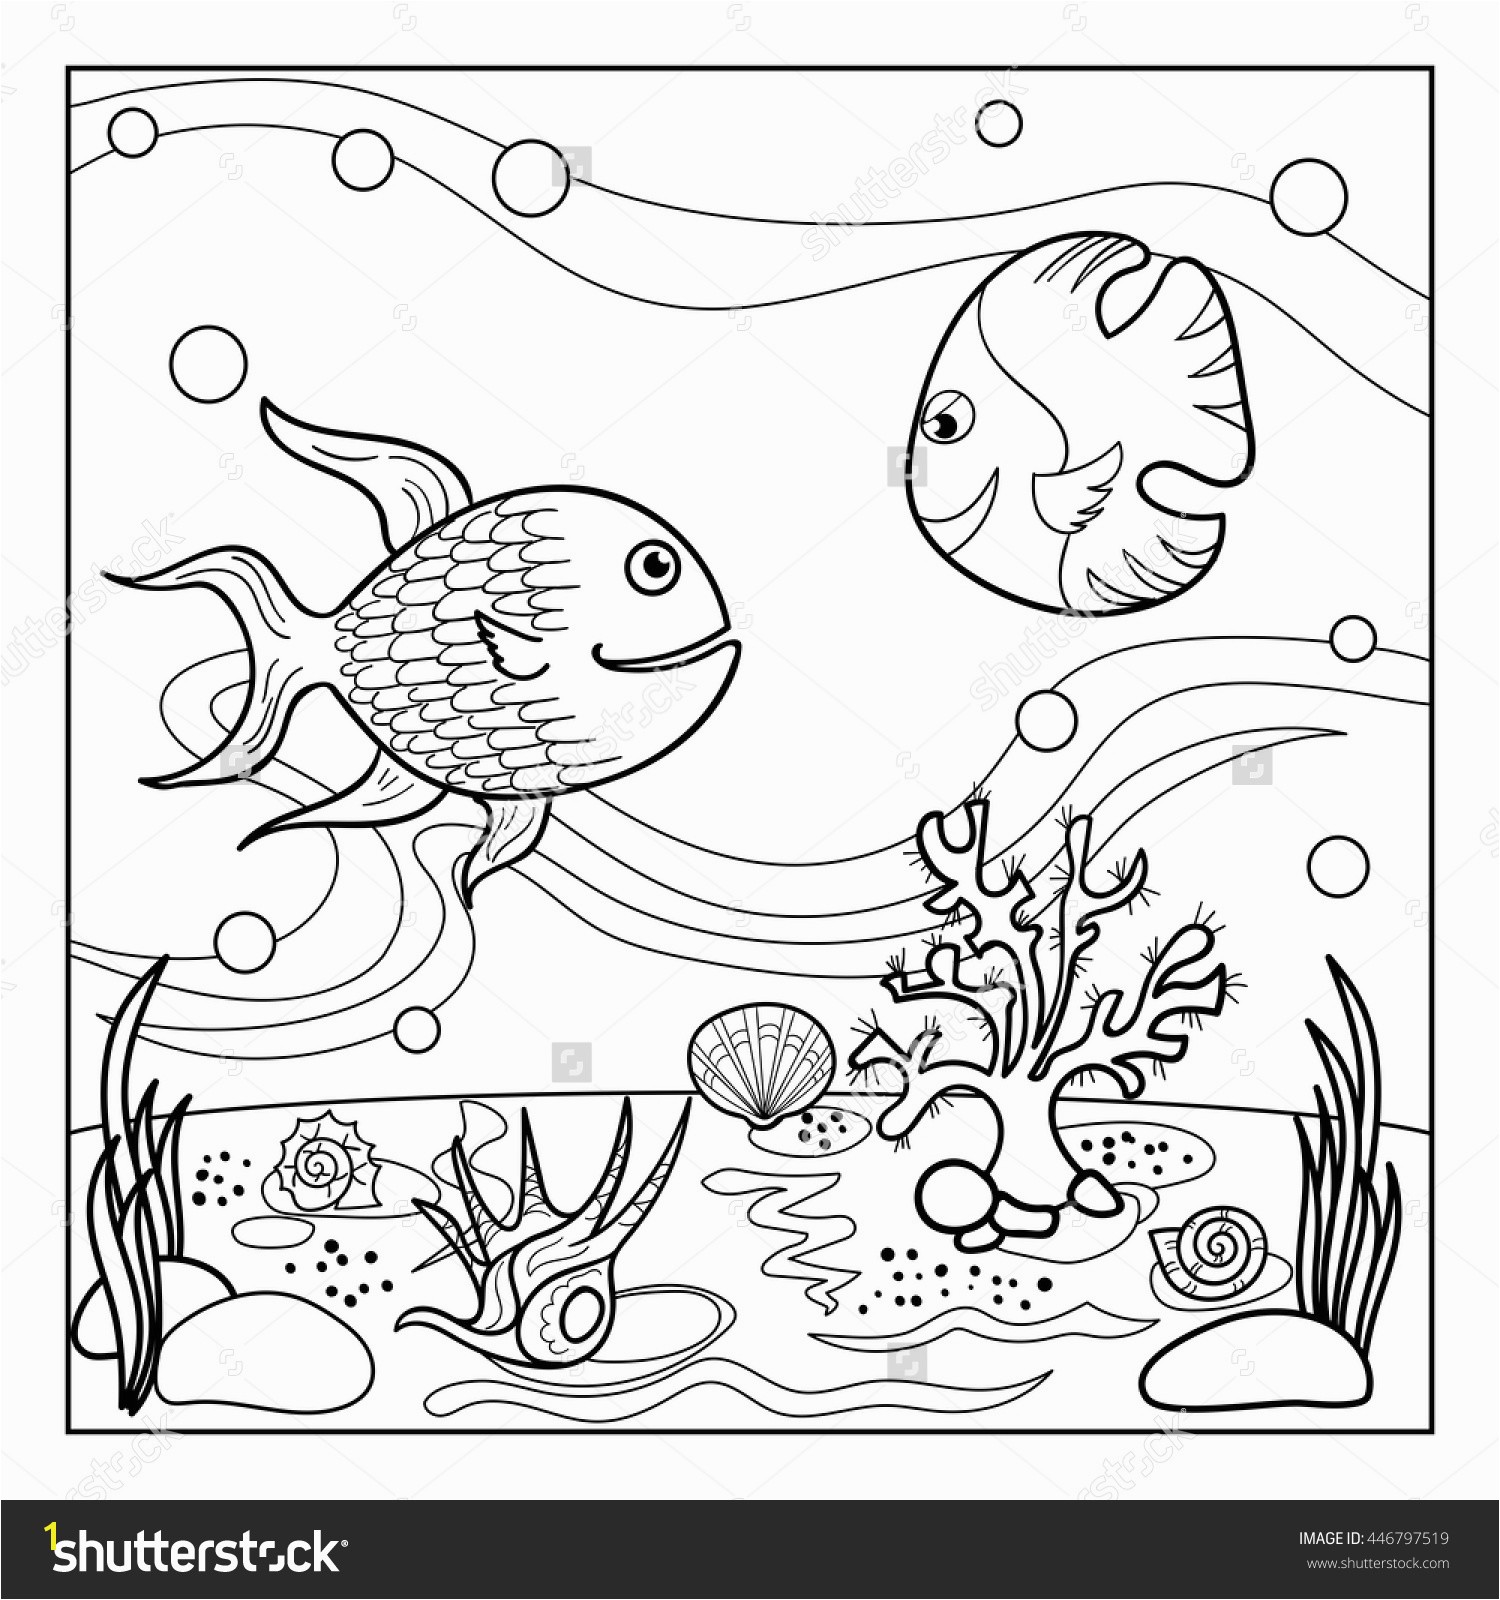 Lds Coloring Pages New Printable Coloring Pages From the Friend A Link to the Lds